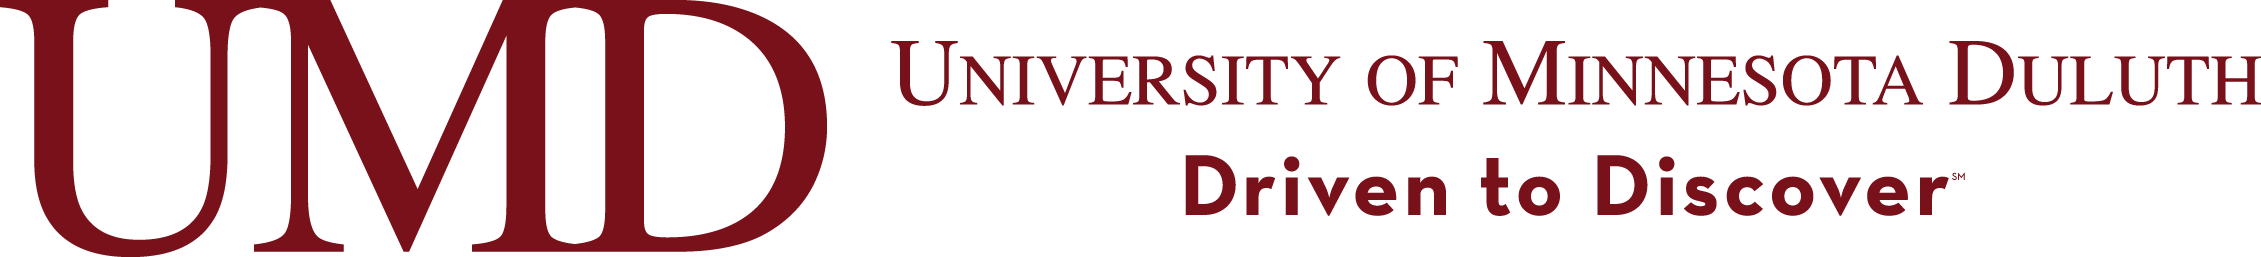 University of Minnesota Duluth Driven to Discover Logo